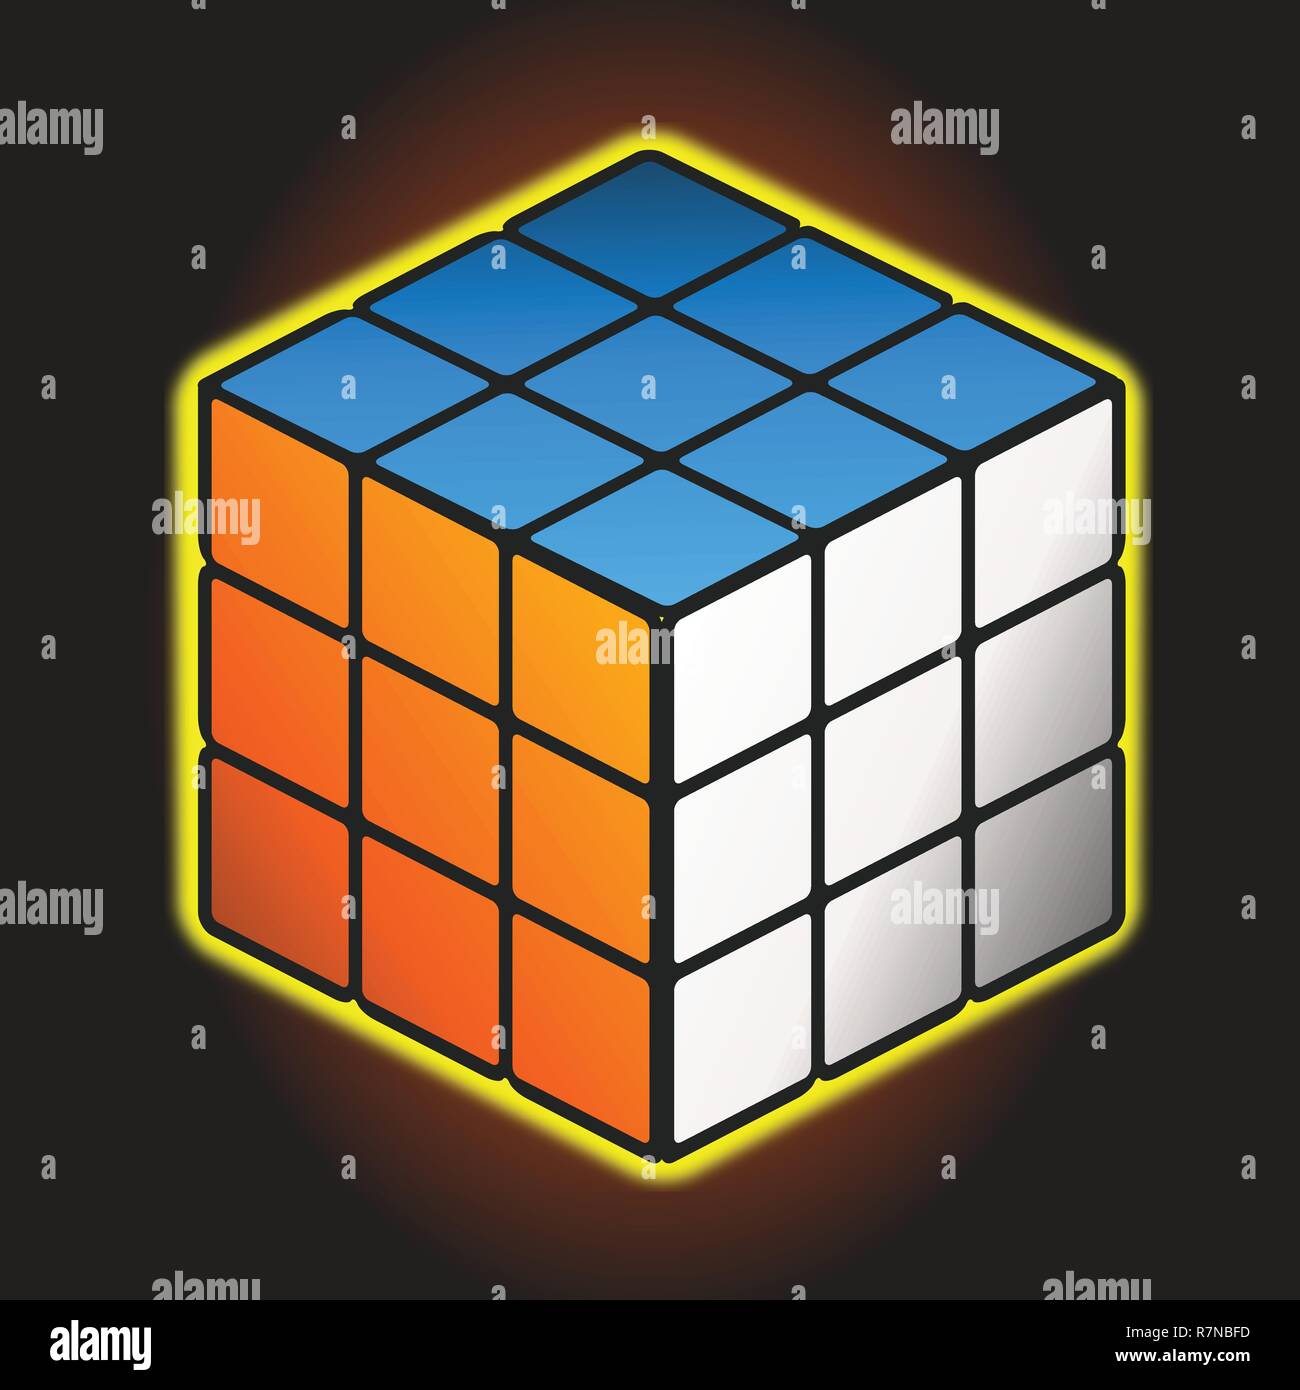 Vector isometric illustration of a Rubik's cube. Isolated on dark background Stock Vector